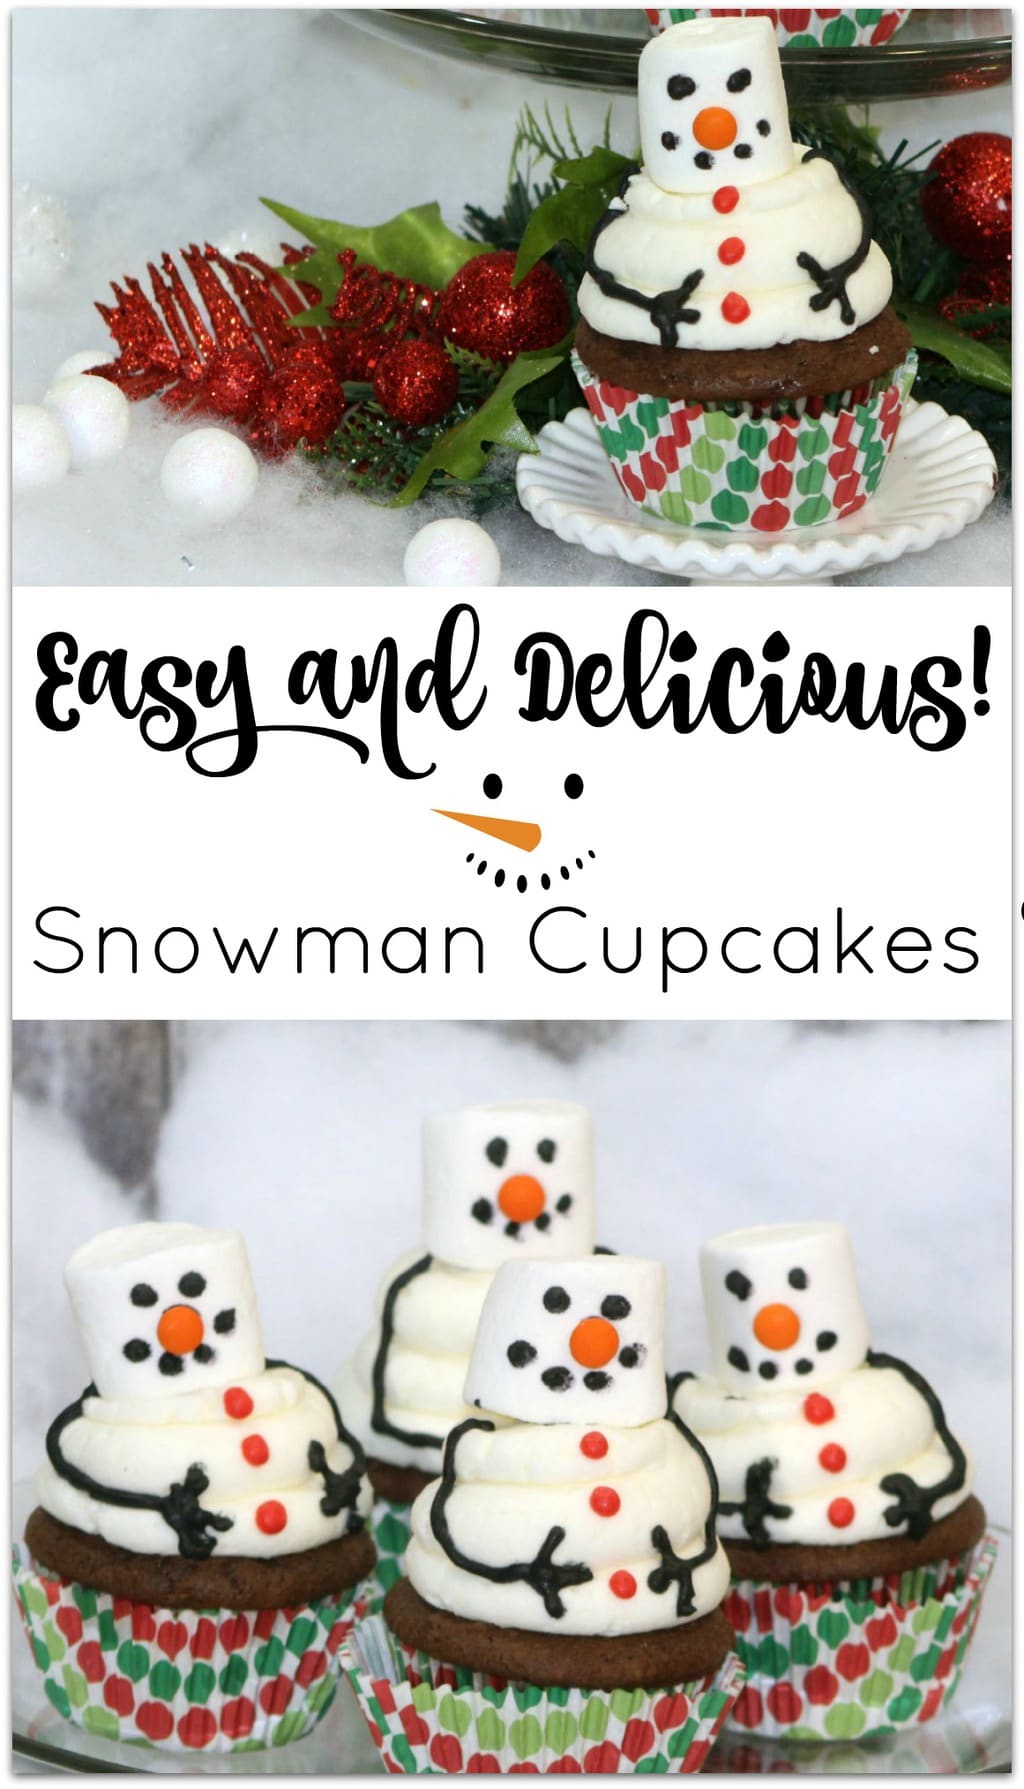 Everyone loves a snowman, and these snowman cupcakes are the perfect winter dessert for a holiday party! Need to whip up something quick? It's such an easy dessert recipe! You can’t go wrong combining chocolate, marshmallows, and cake, right? Head to the kitchen with the kids. Even the little ones can build these snowman cupcakes! 